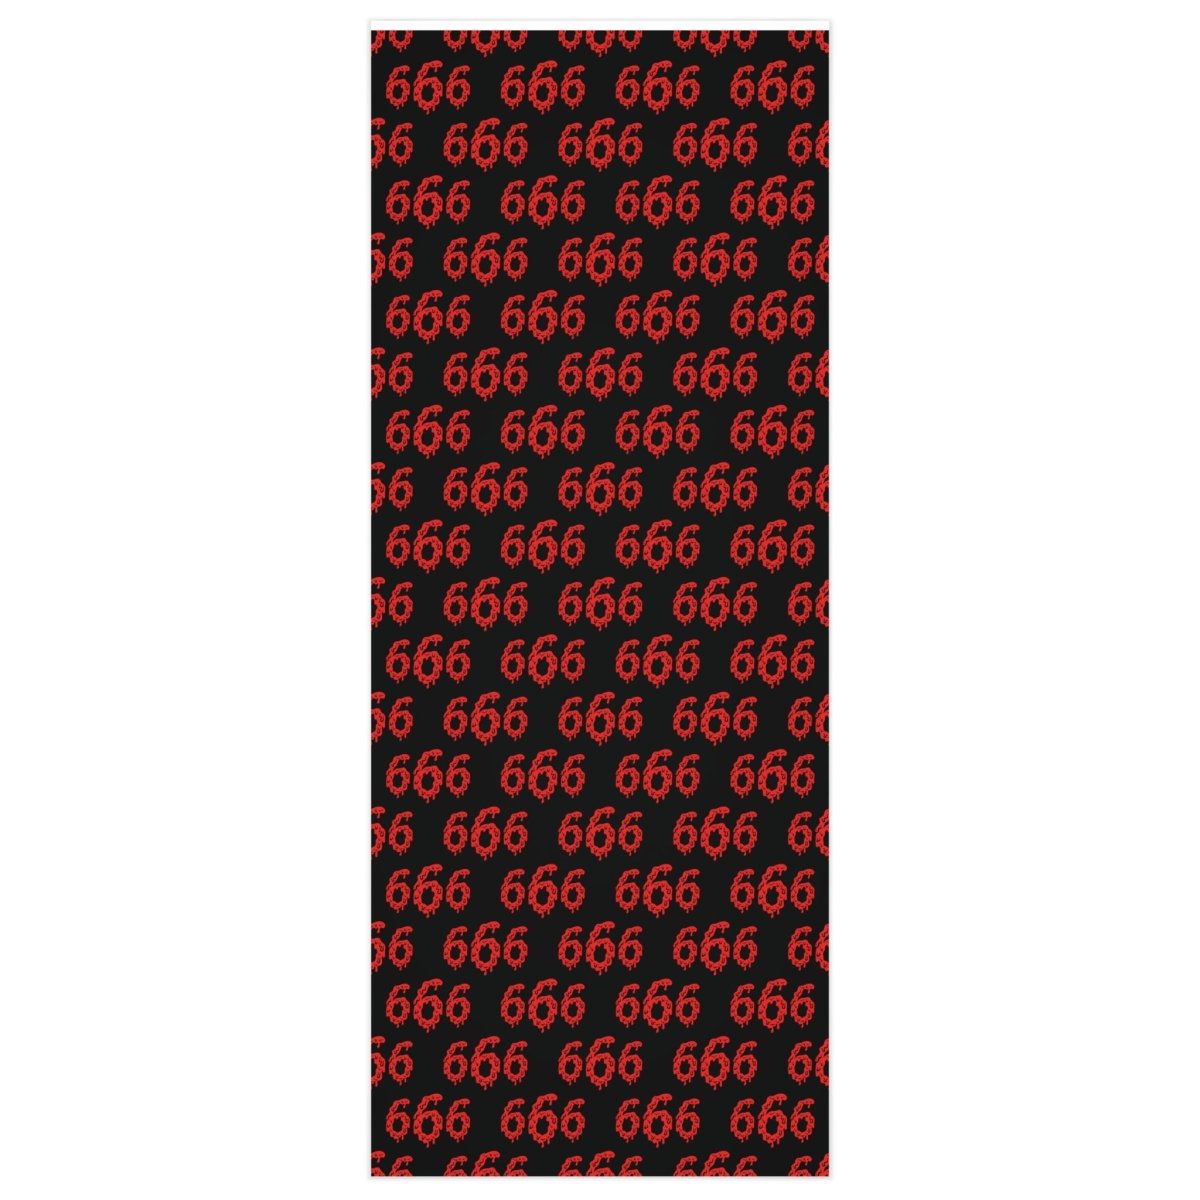 Too Fast | 666 Satanic Gift Wrapping Paper